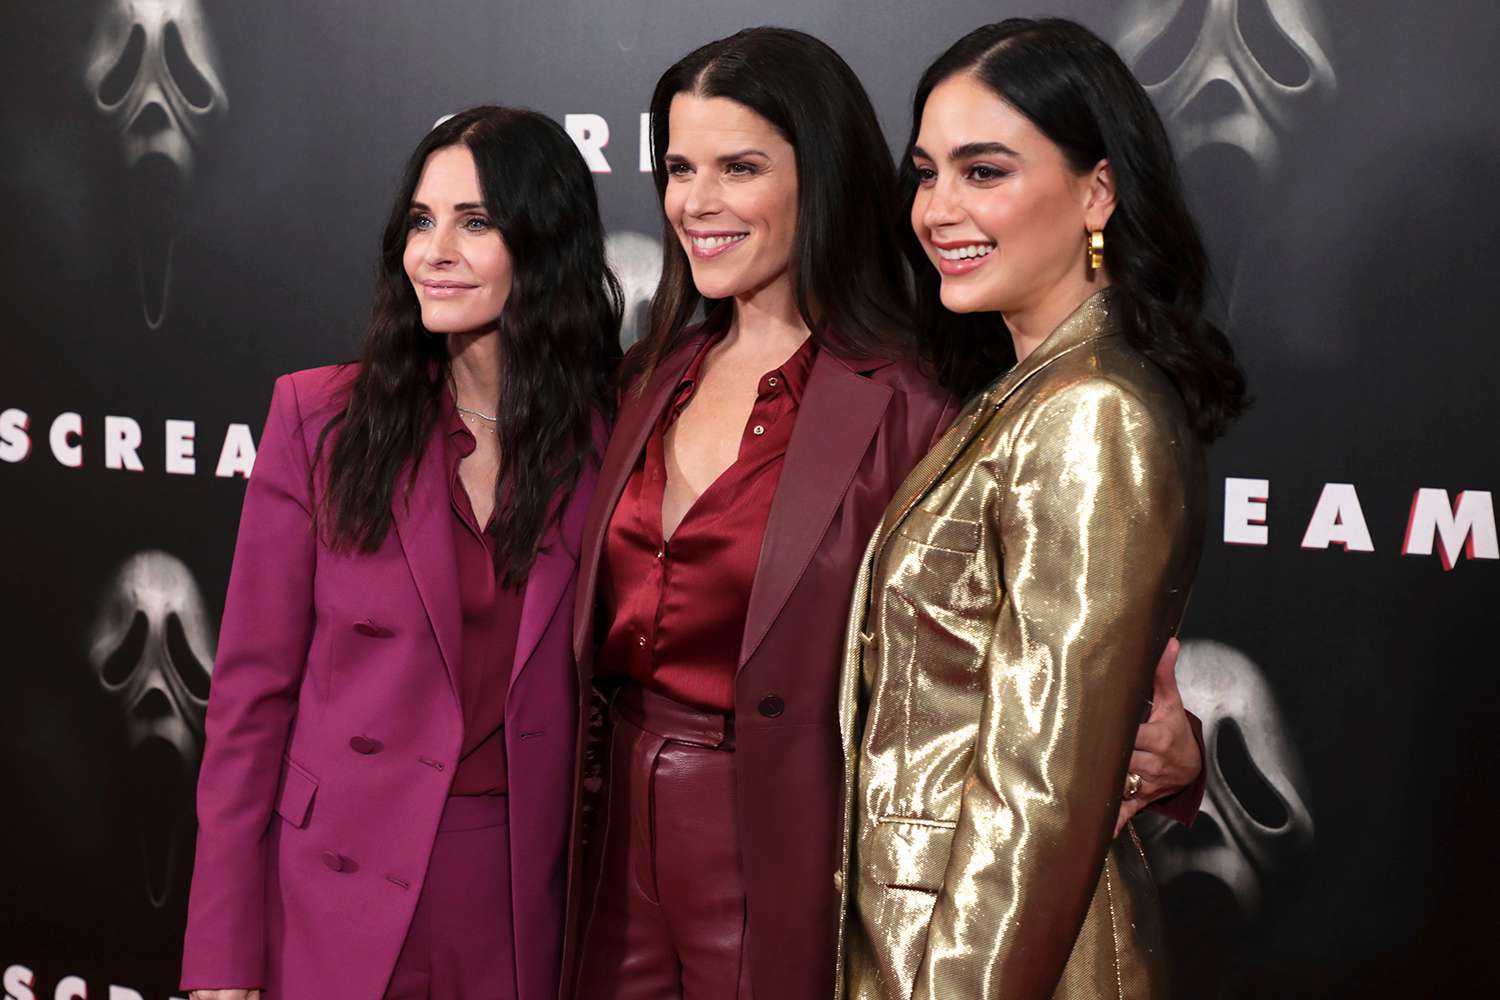 Courteney Cox, Neve Campbell and Melissa Barrera attend the Paramount Pictures and Spyglass Media Group's "SCREAM" photo call at the Four Seasons Hotel in Beverly Hills, CA on Friday, January 7, 2022.